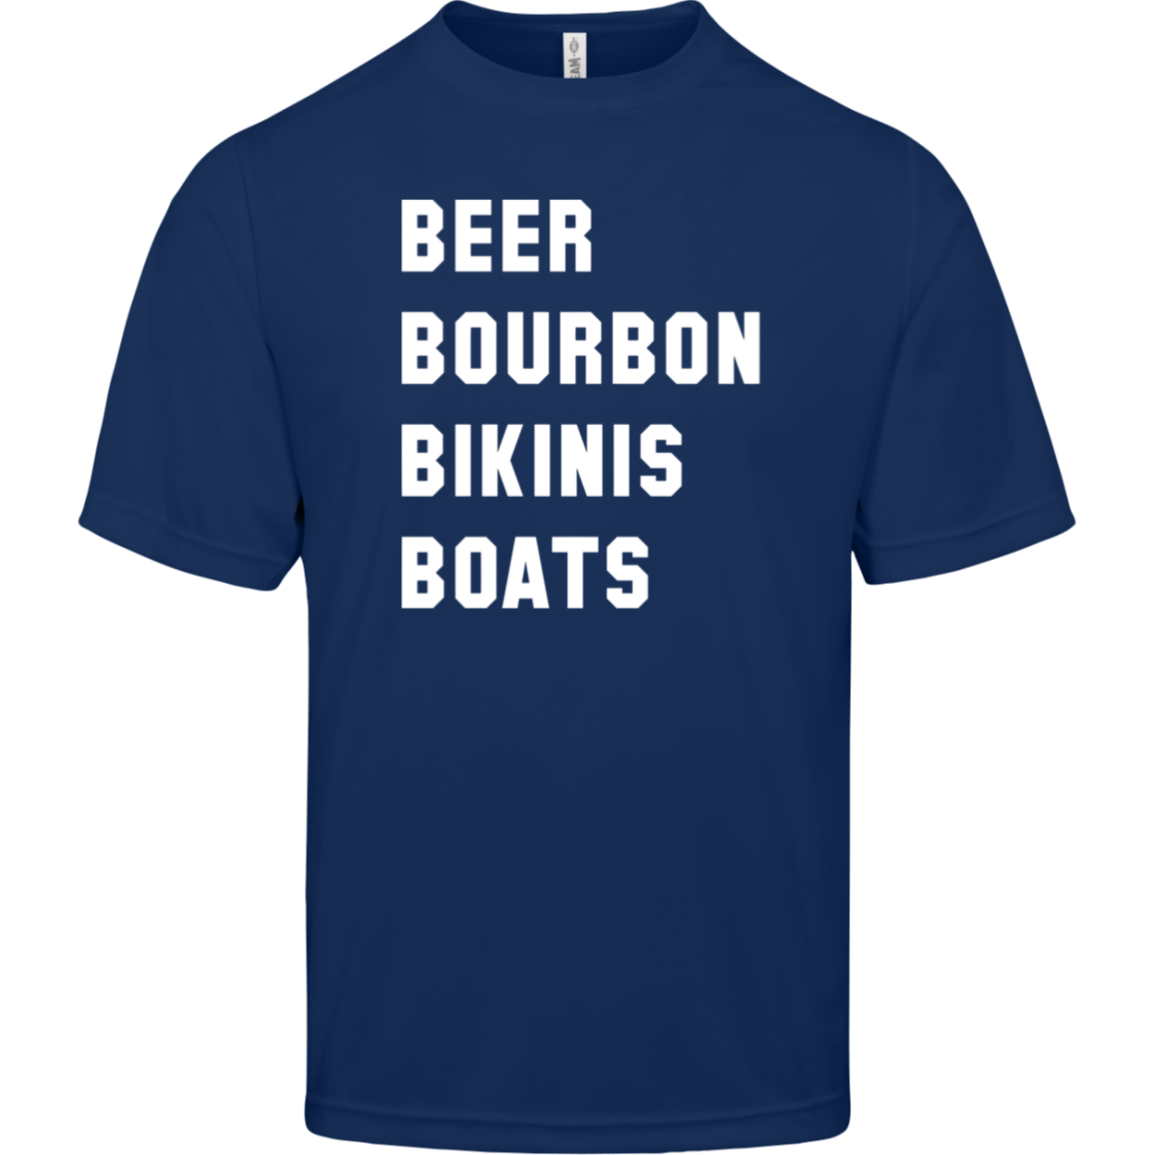 ***2 SIDED***  HRCL FL - Beer Bourbon Bikinis Boats - - 2 Sided - UV 40+ Protection TT11 Team 365 Mens Zone Tee